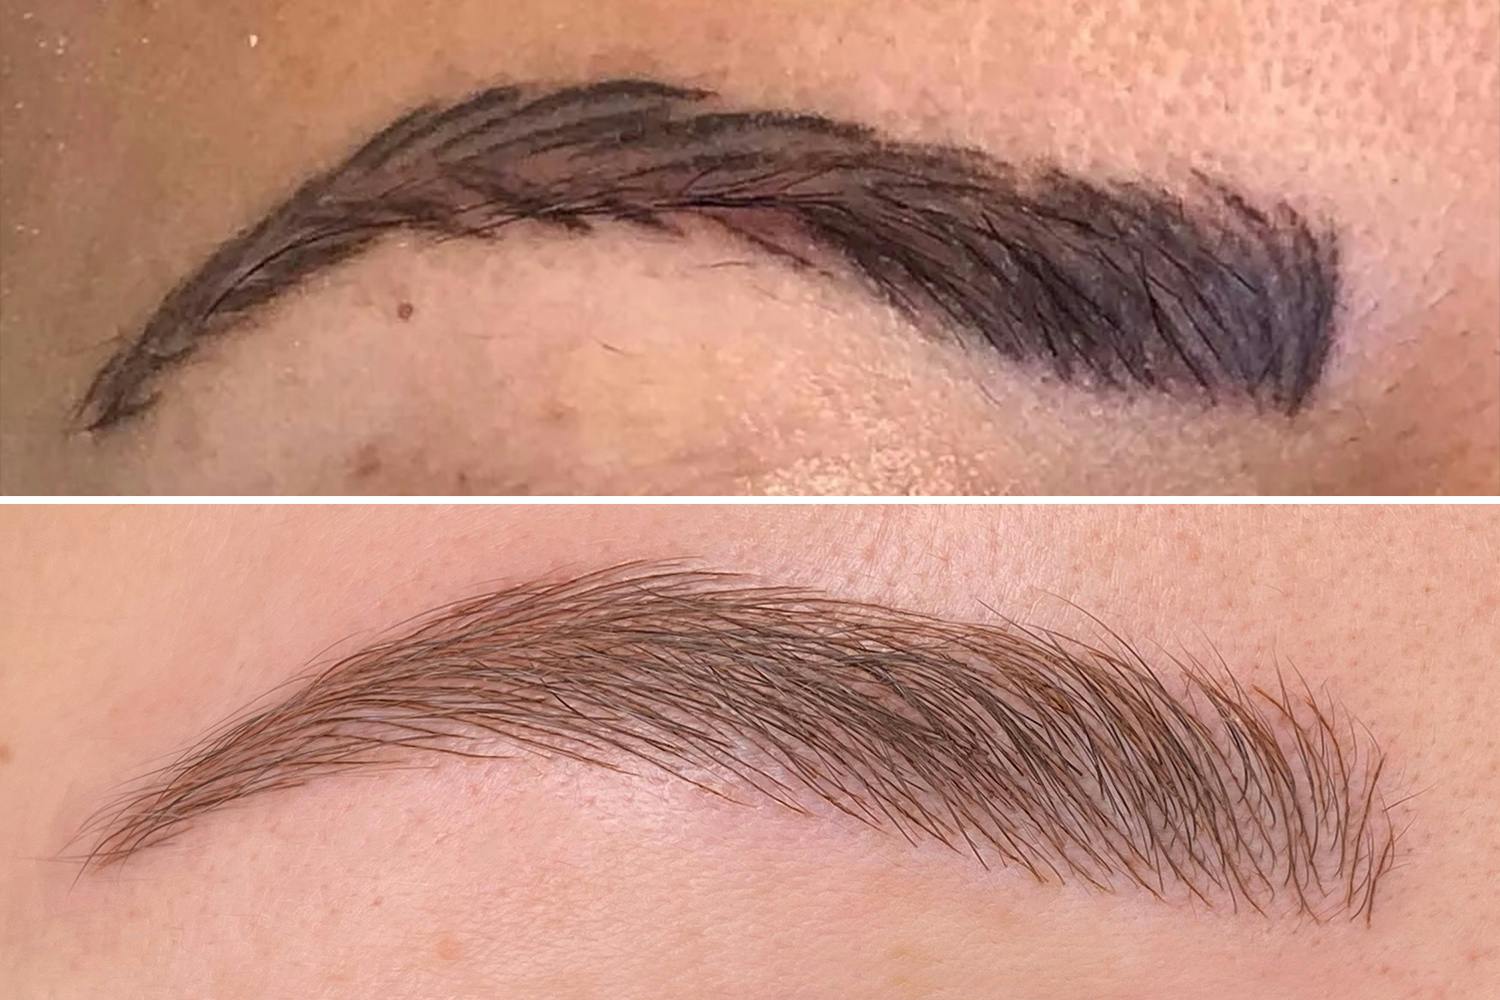 Read more about Eyebrow Microblading Procedure - Facts and Myths. PhiBrows Blog